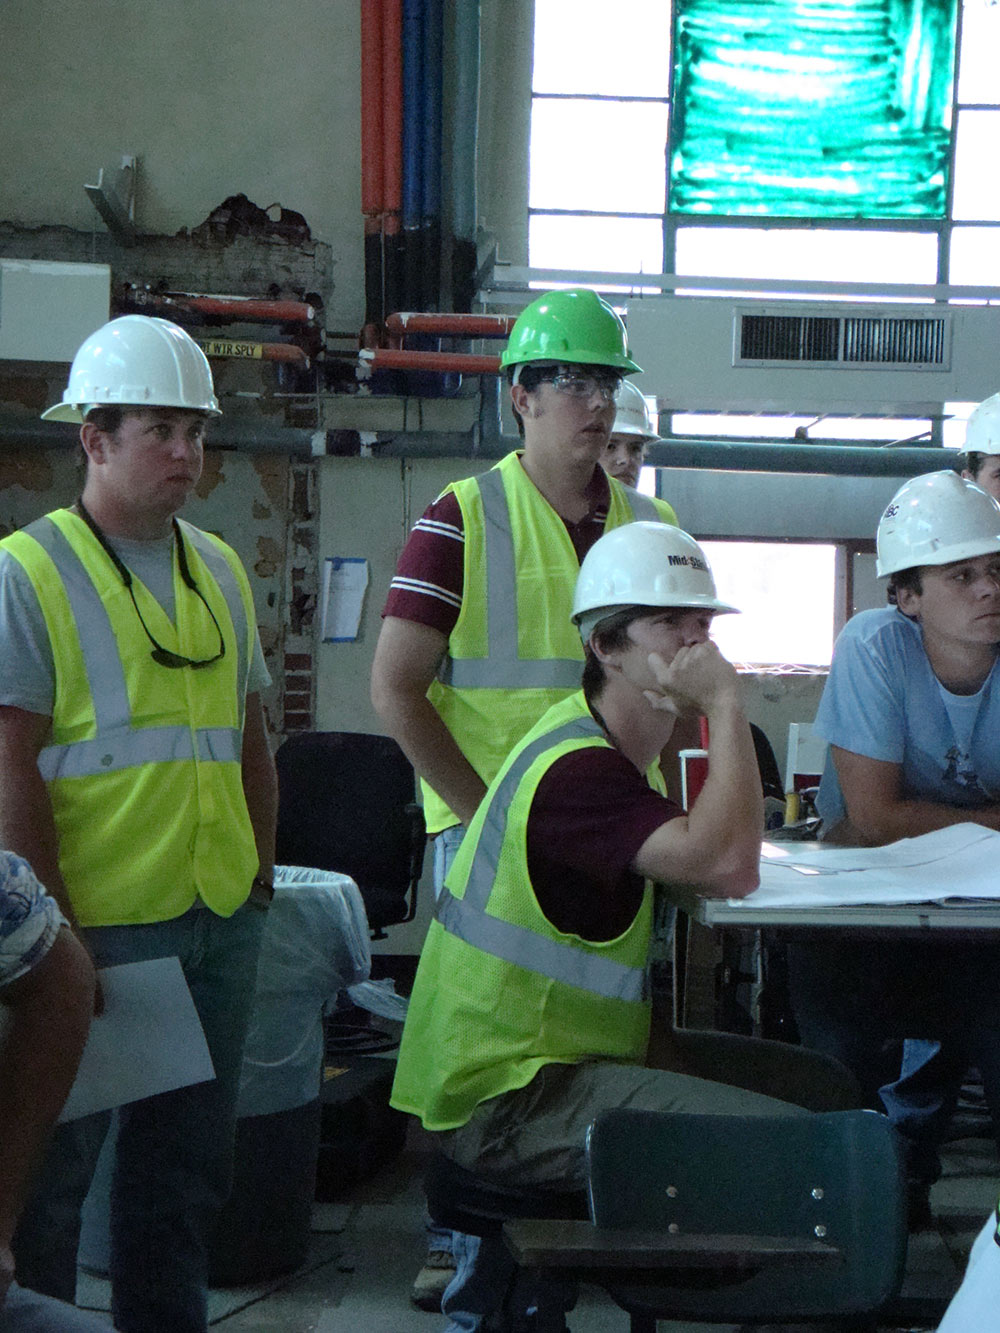 group all looking one direction - wearing hard hats